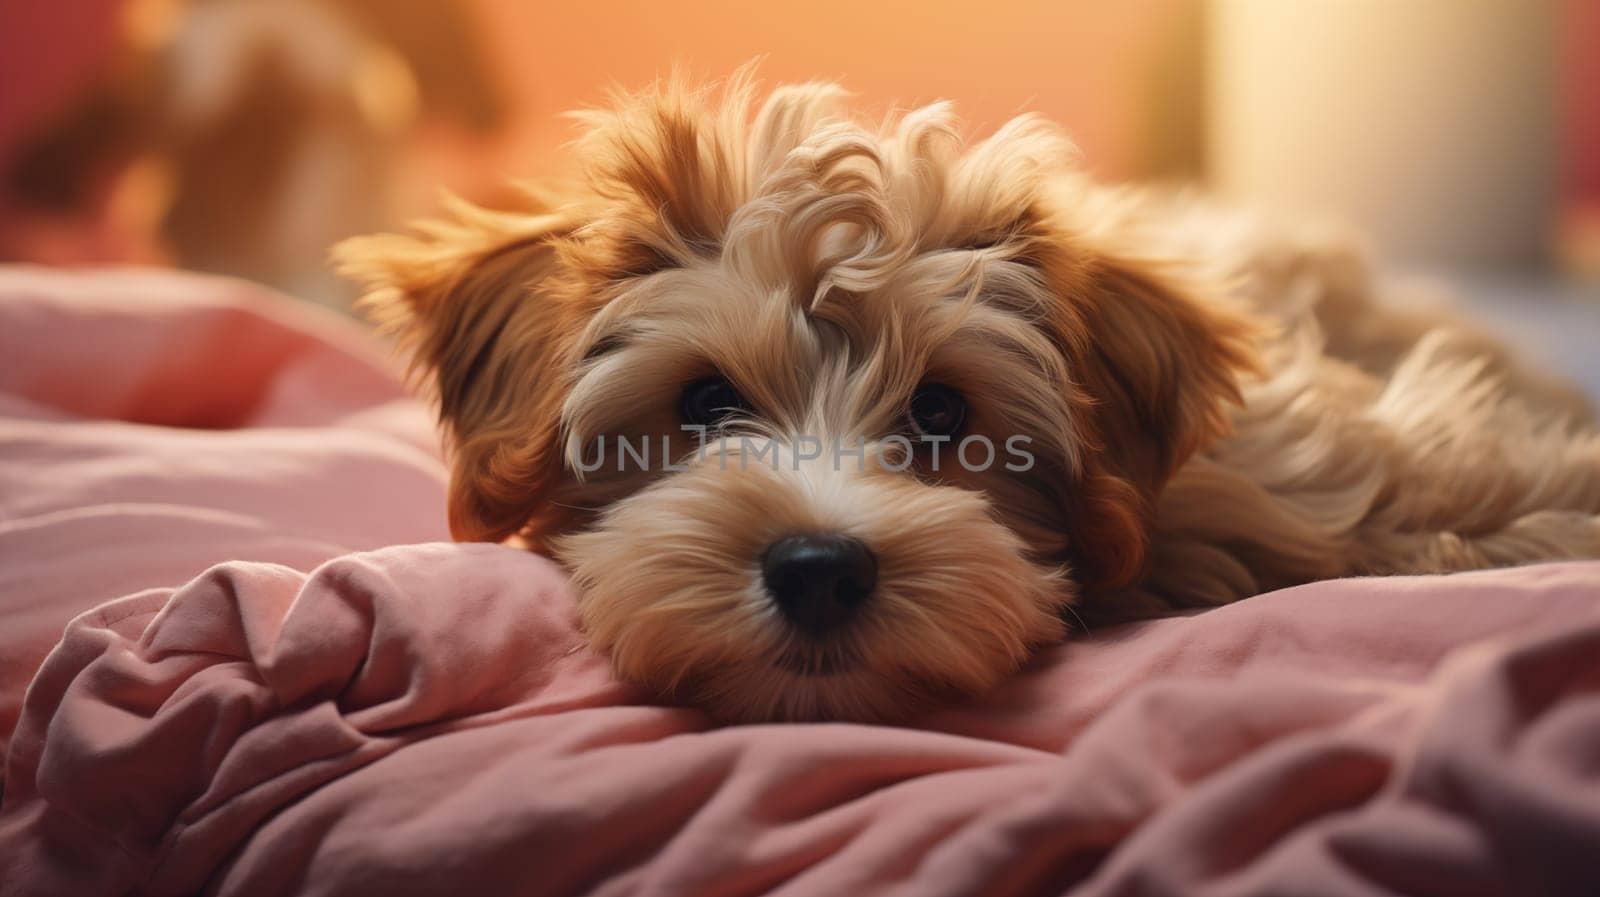 Calm ginger terrier puppy lying on a pink cozy blanket, at bedroom, warm light.